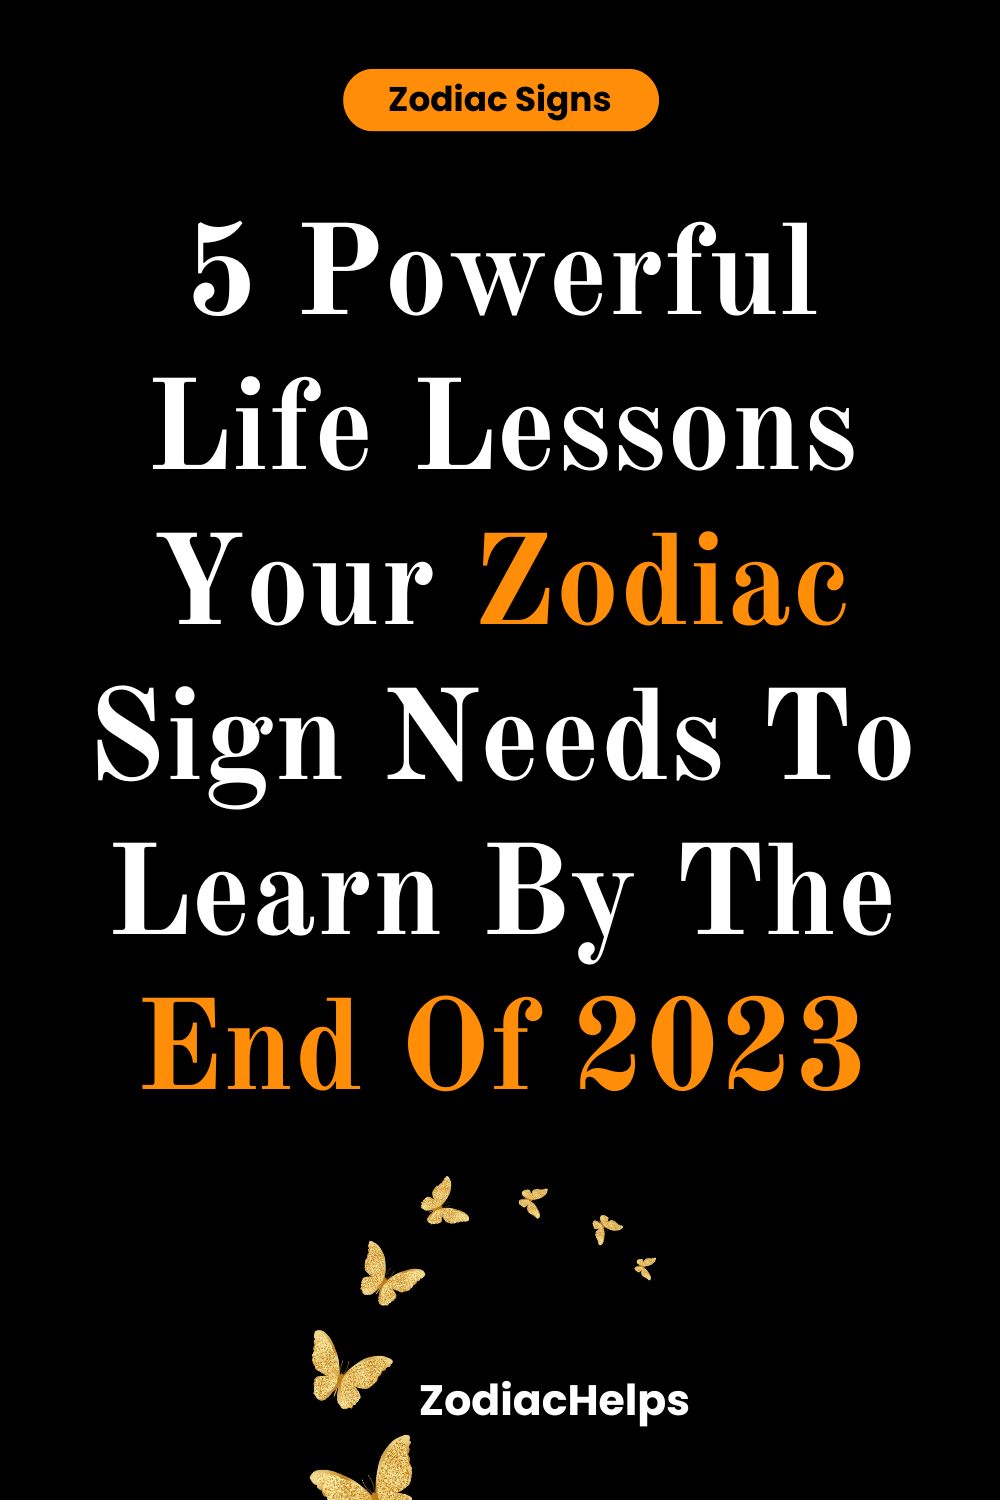 5 Powerful Life Lessons Your Zodiac Sign Needs To Learn By The End Of 2023